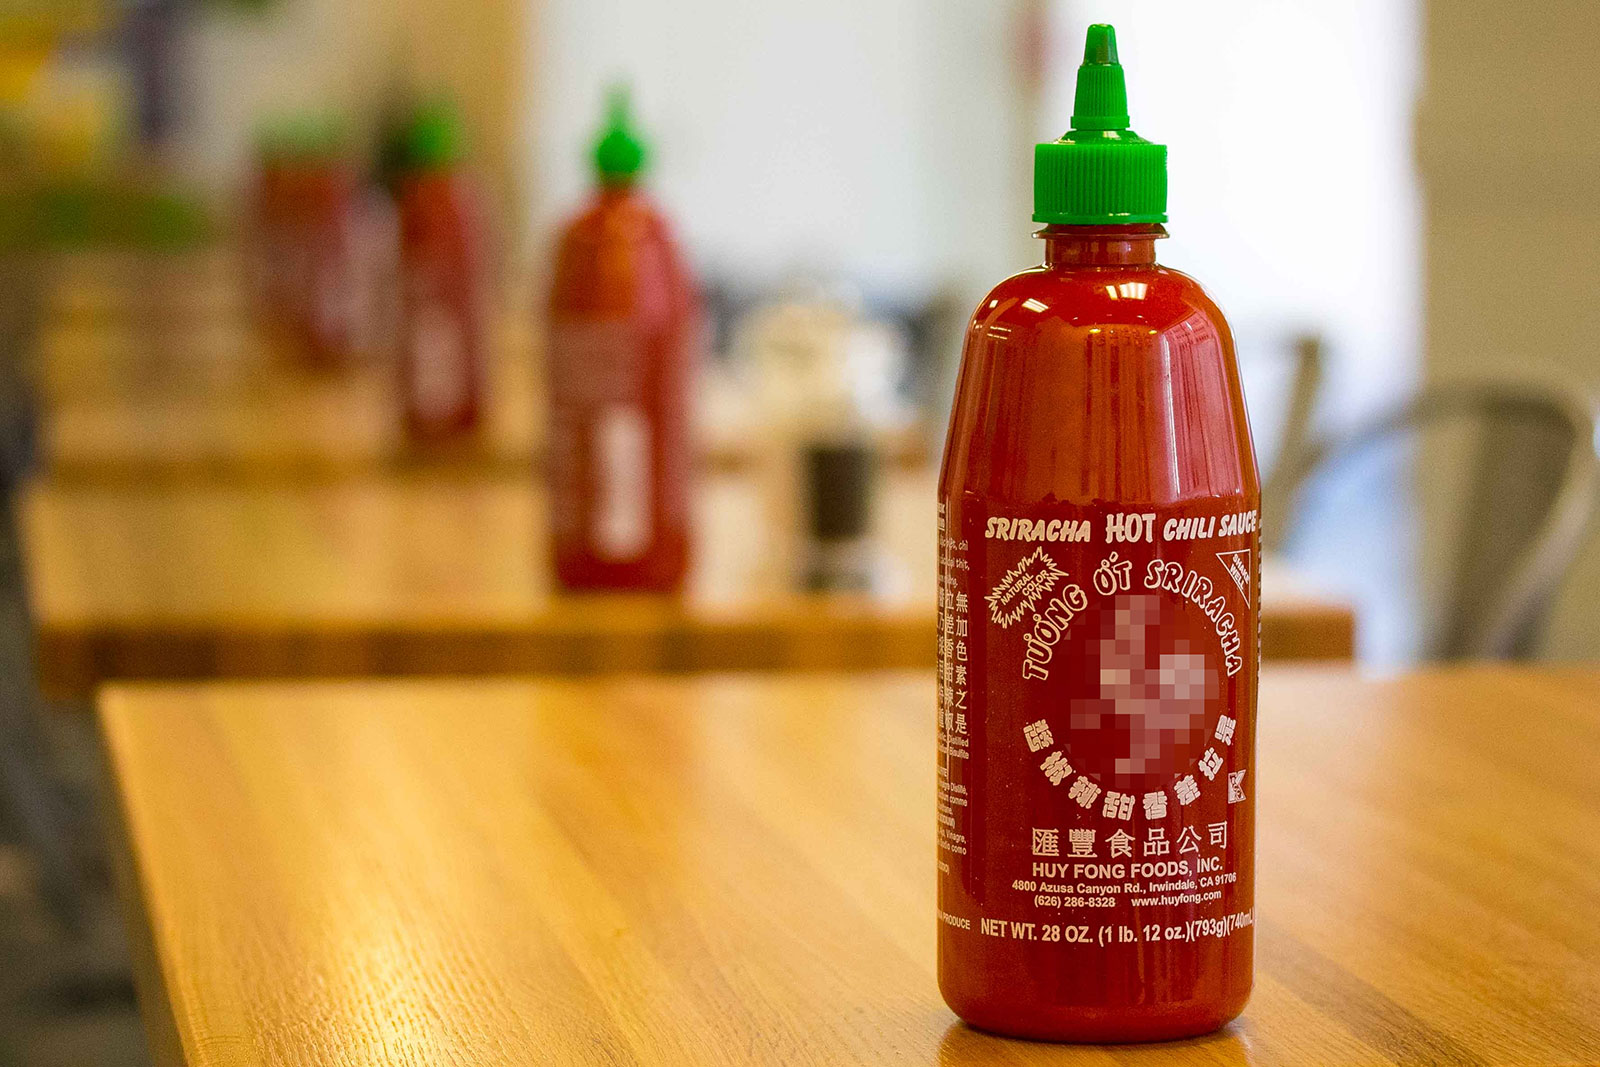 🌶 Only a Person Who Can Handle the Heat Will Have Eaten 13/25 of These Spicy Foods Sriracha